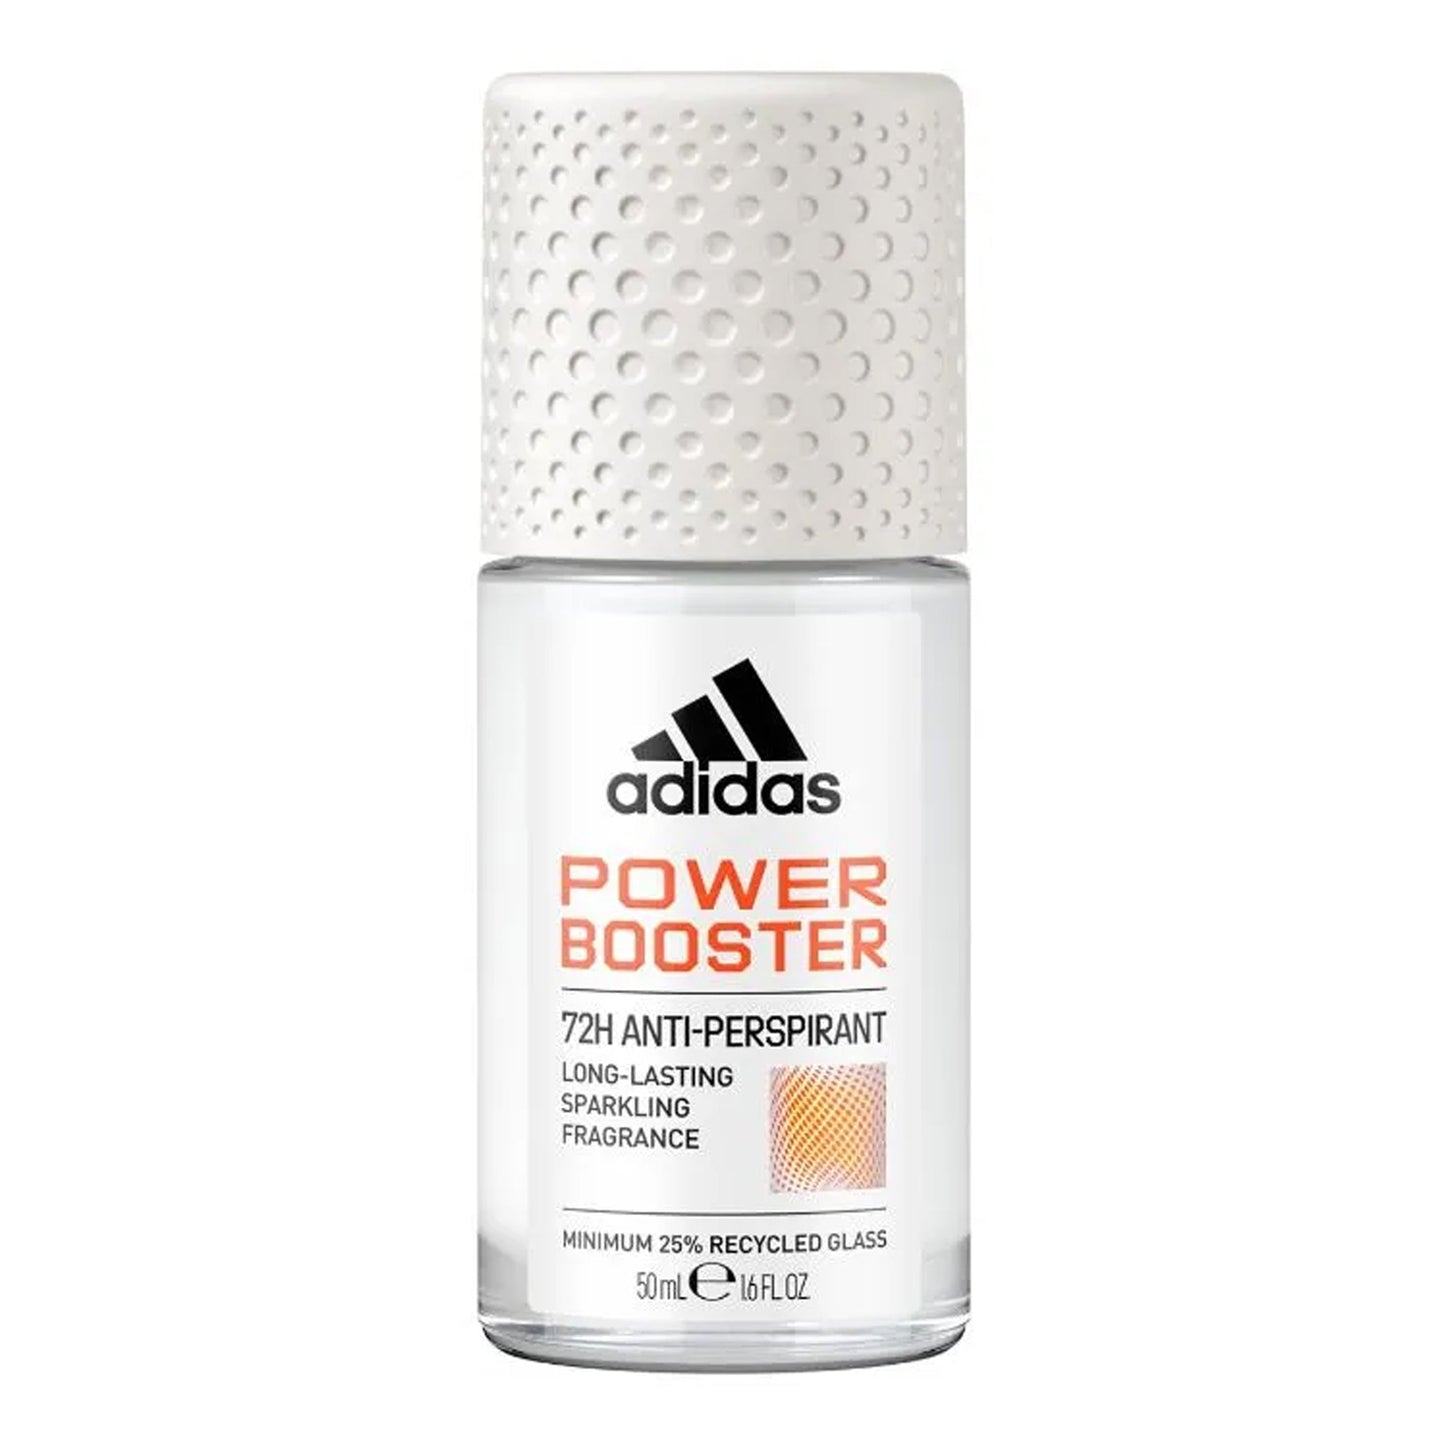 ADIDAS - POWER BOOSTER 72H ANTI-PERSPIRANT DEODORANT ROLL ON FOR WOMEN - 50ML